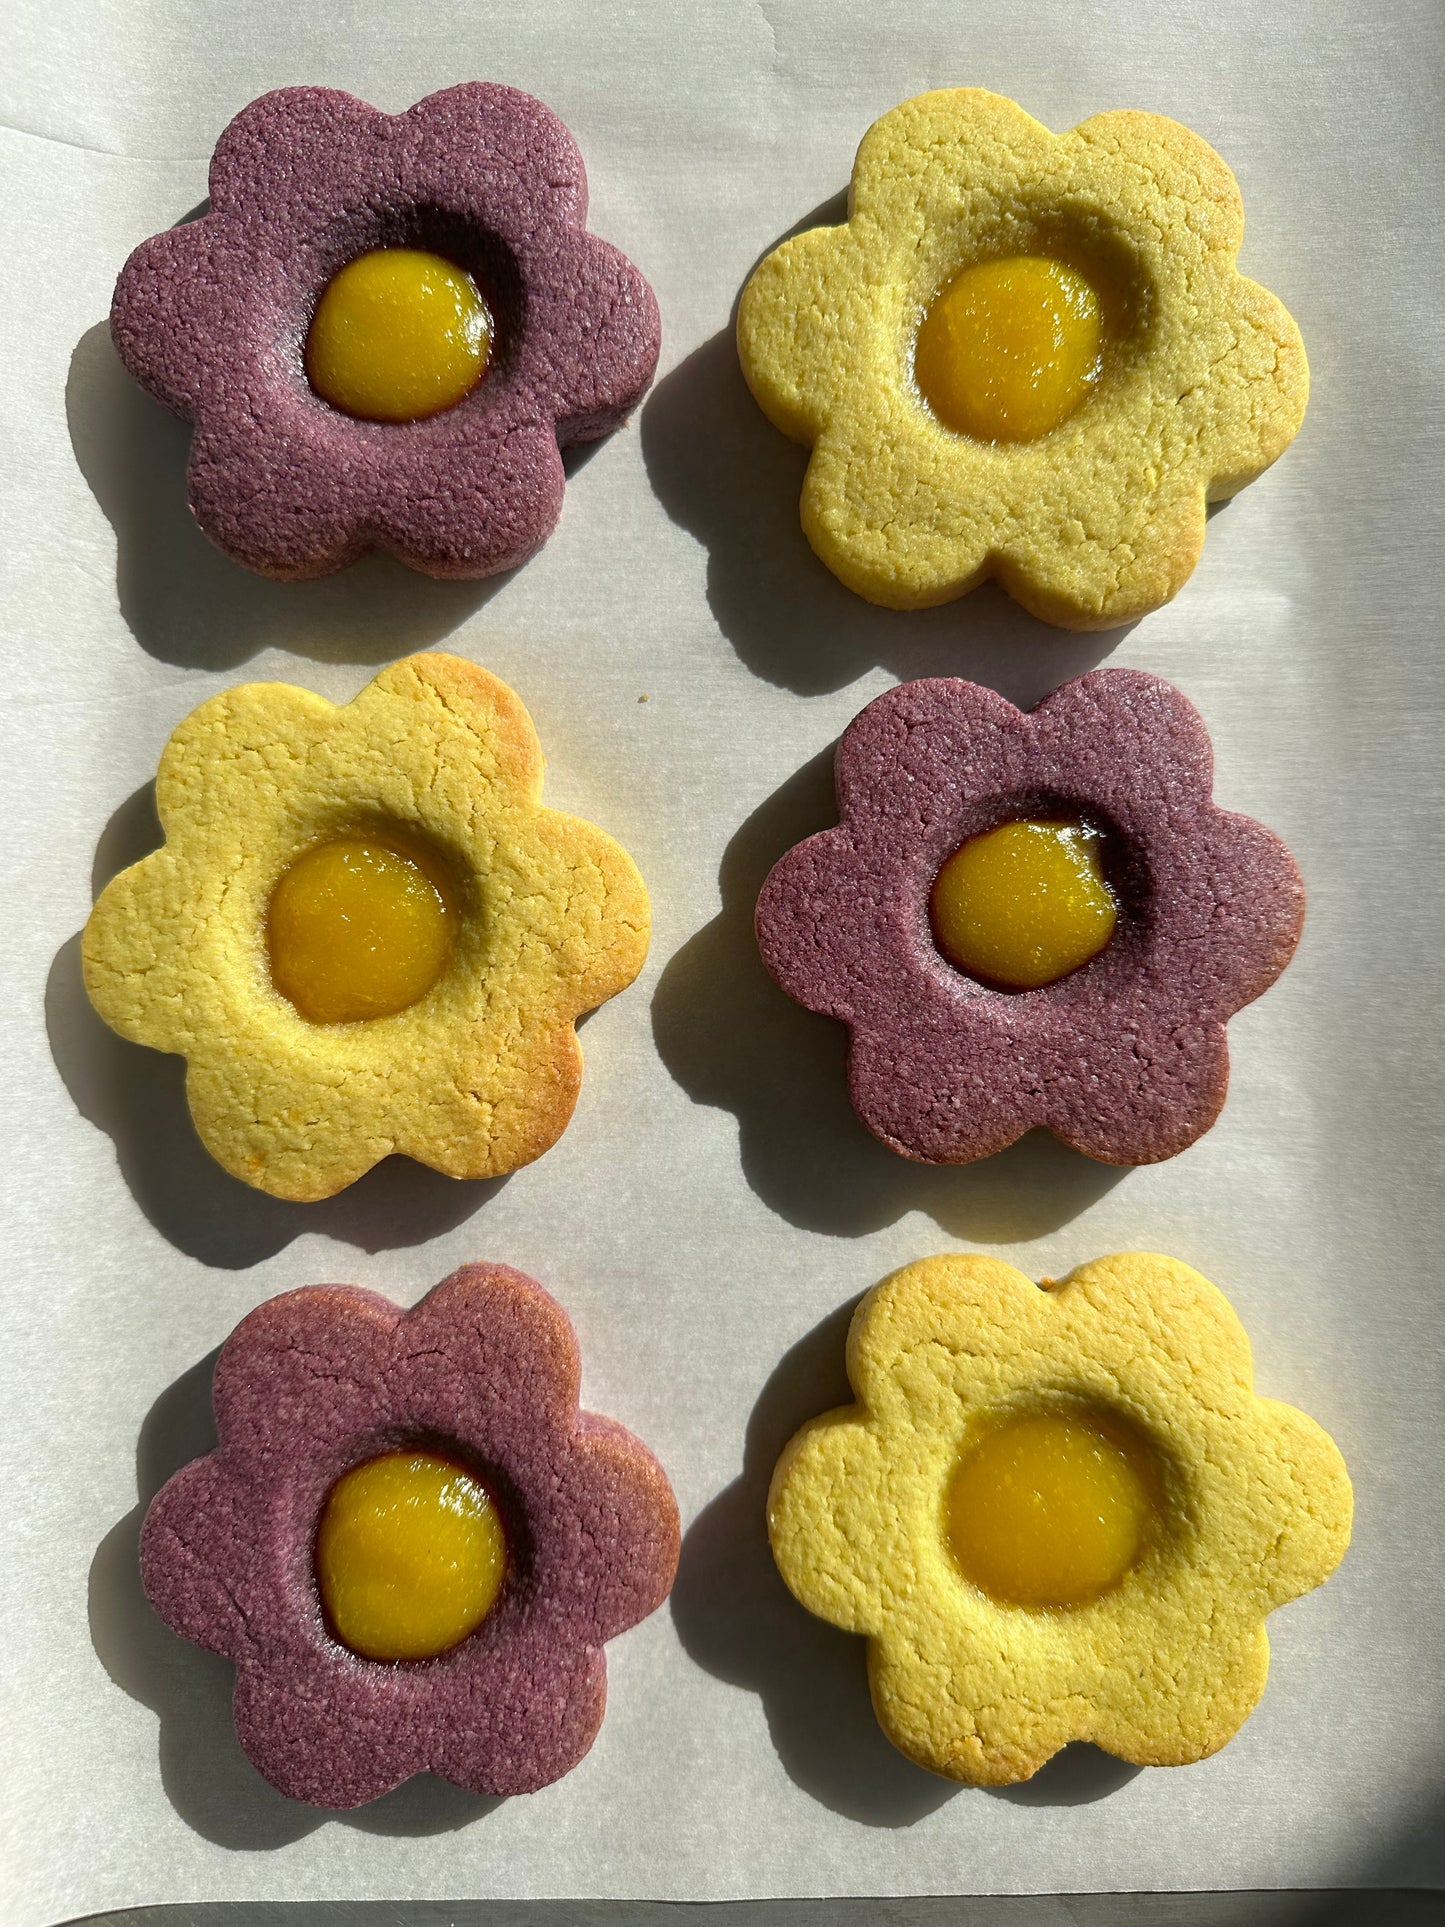 Build-a-Box of Flower Cookies (8-Pack)